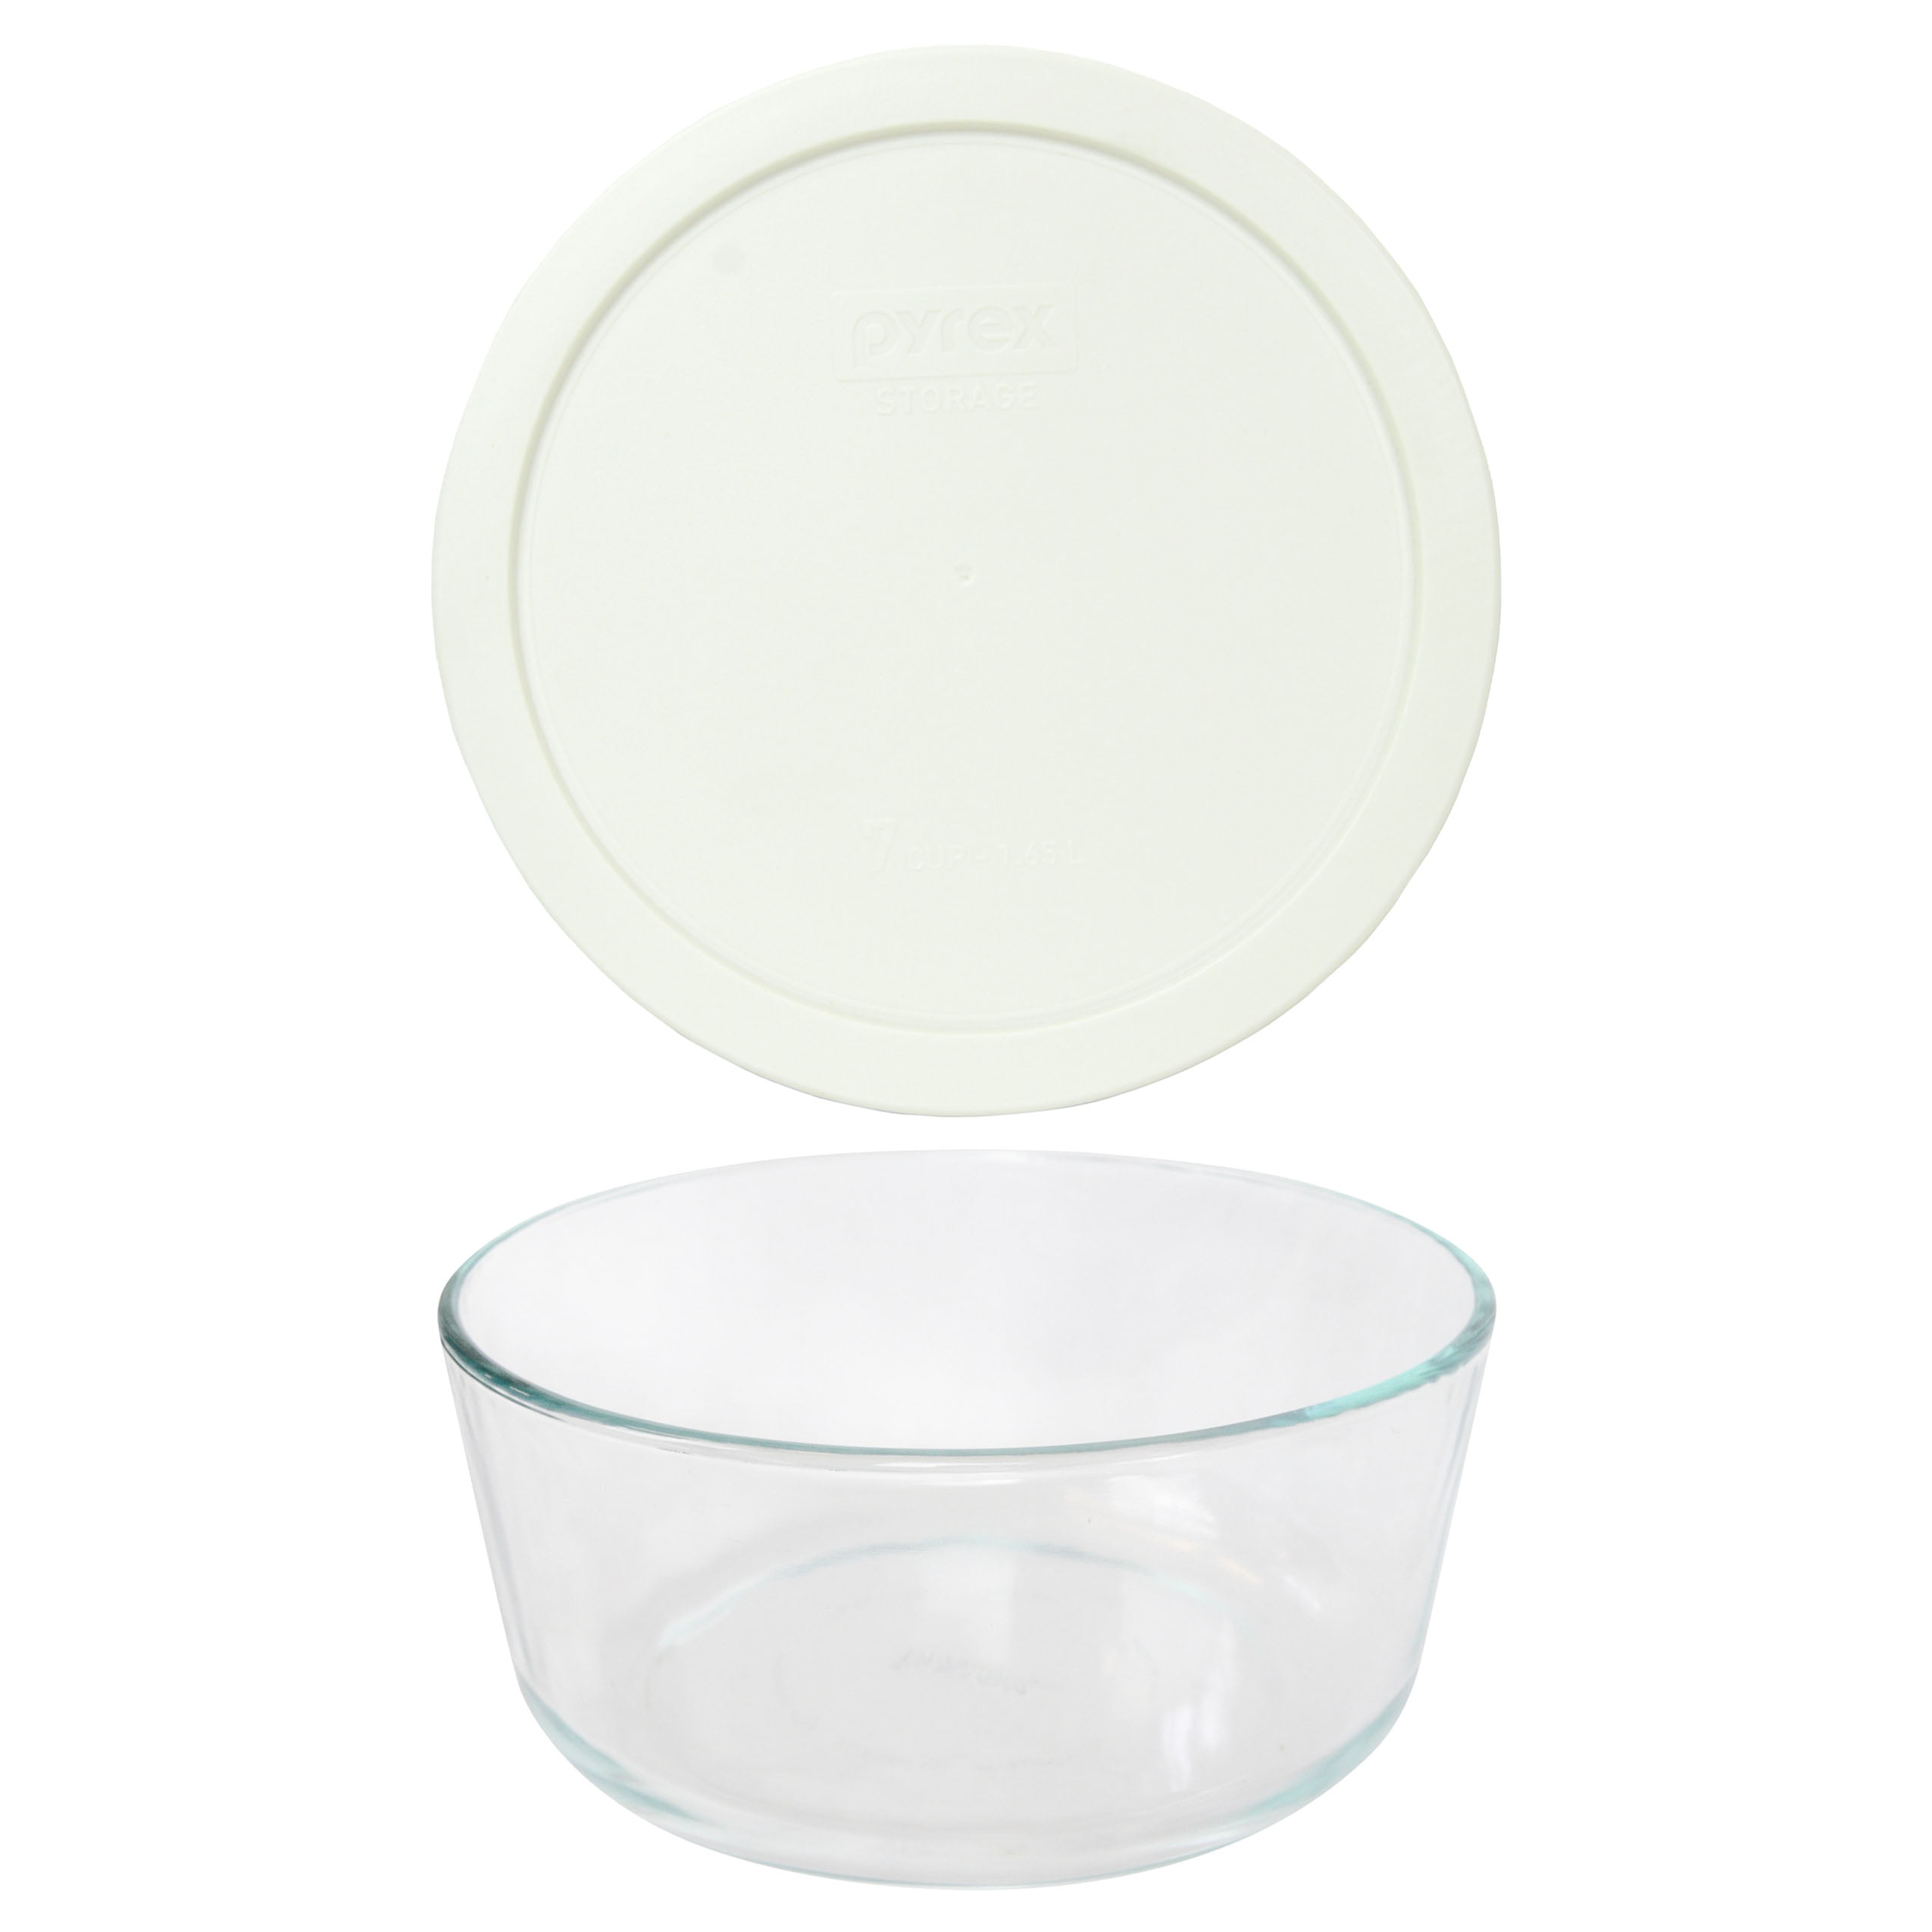 Pyrex 7203 7-Cup Glass Food Storage Bowl w/ 7402-PC White Plastic Lid 2-Pack 